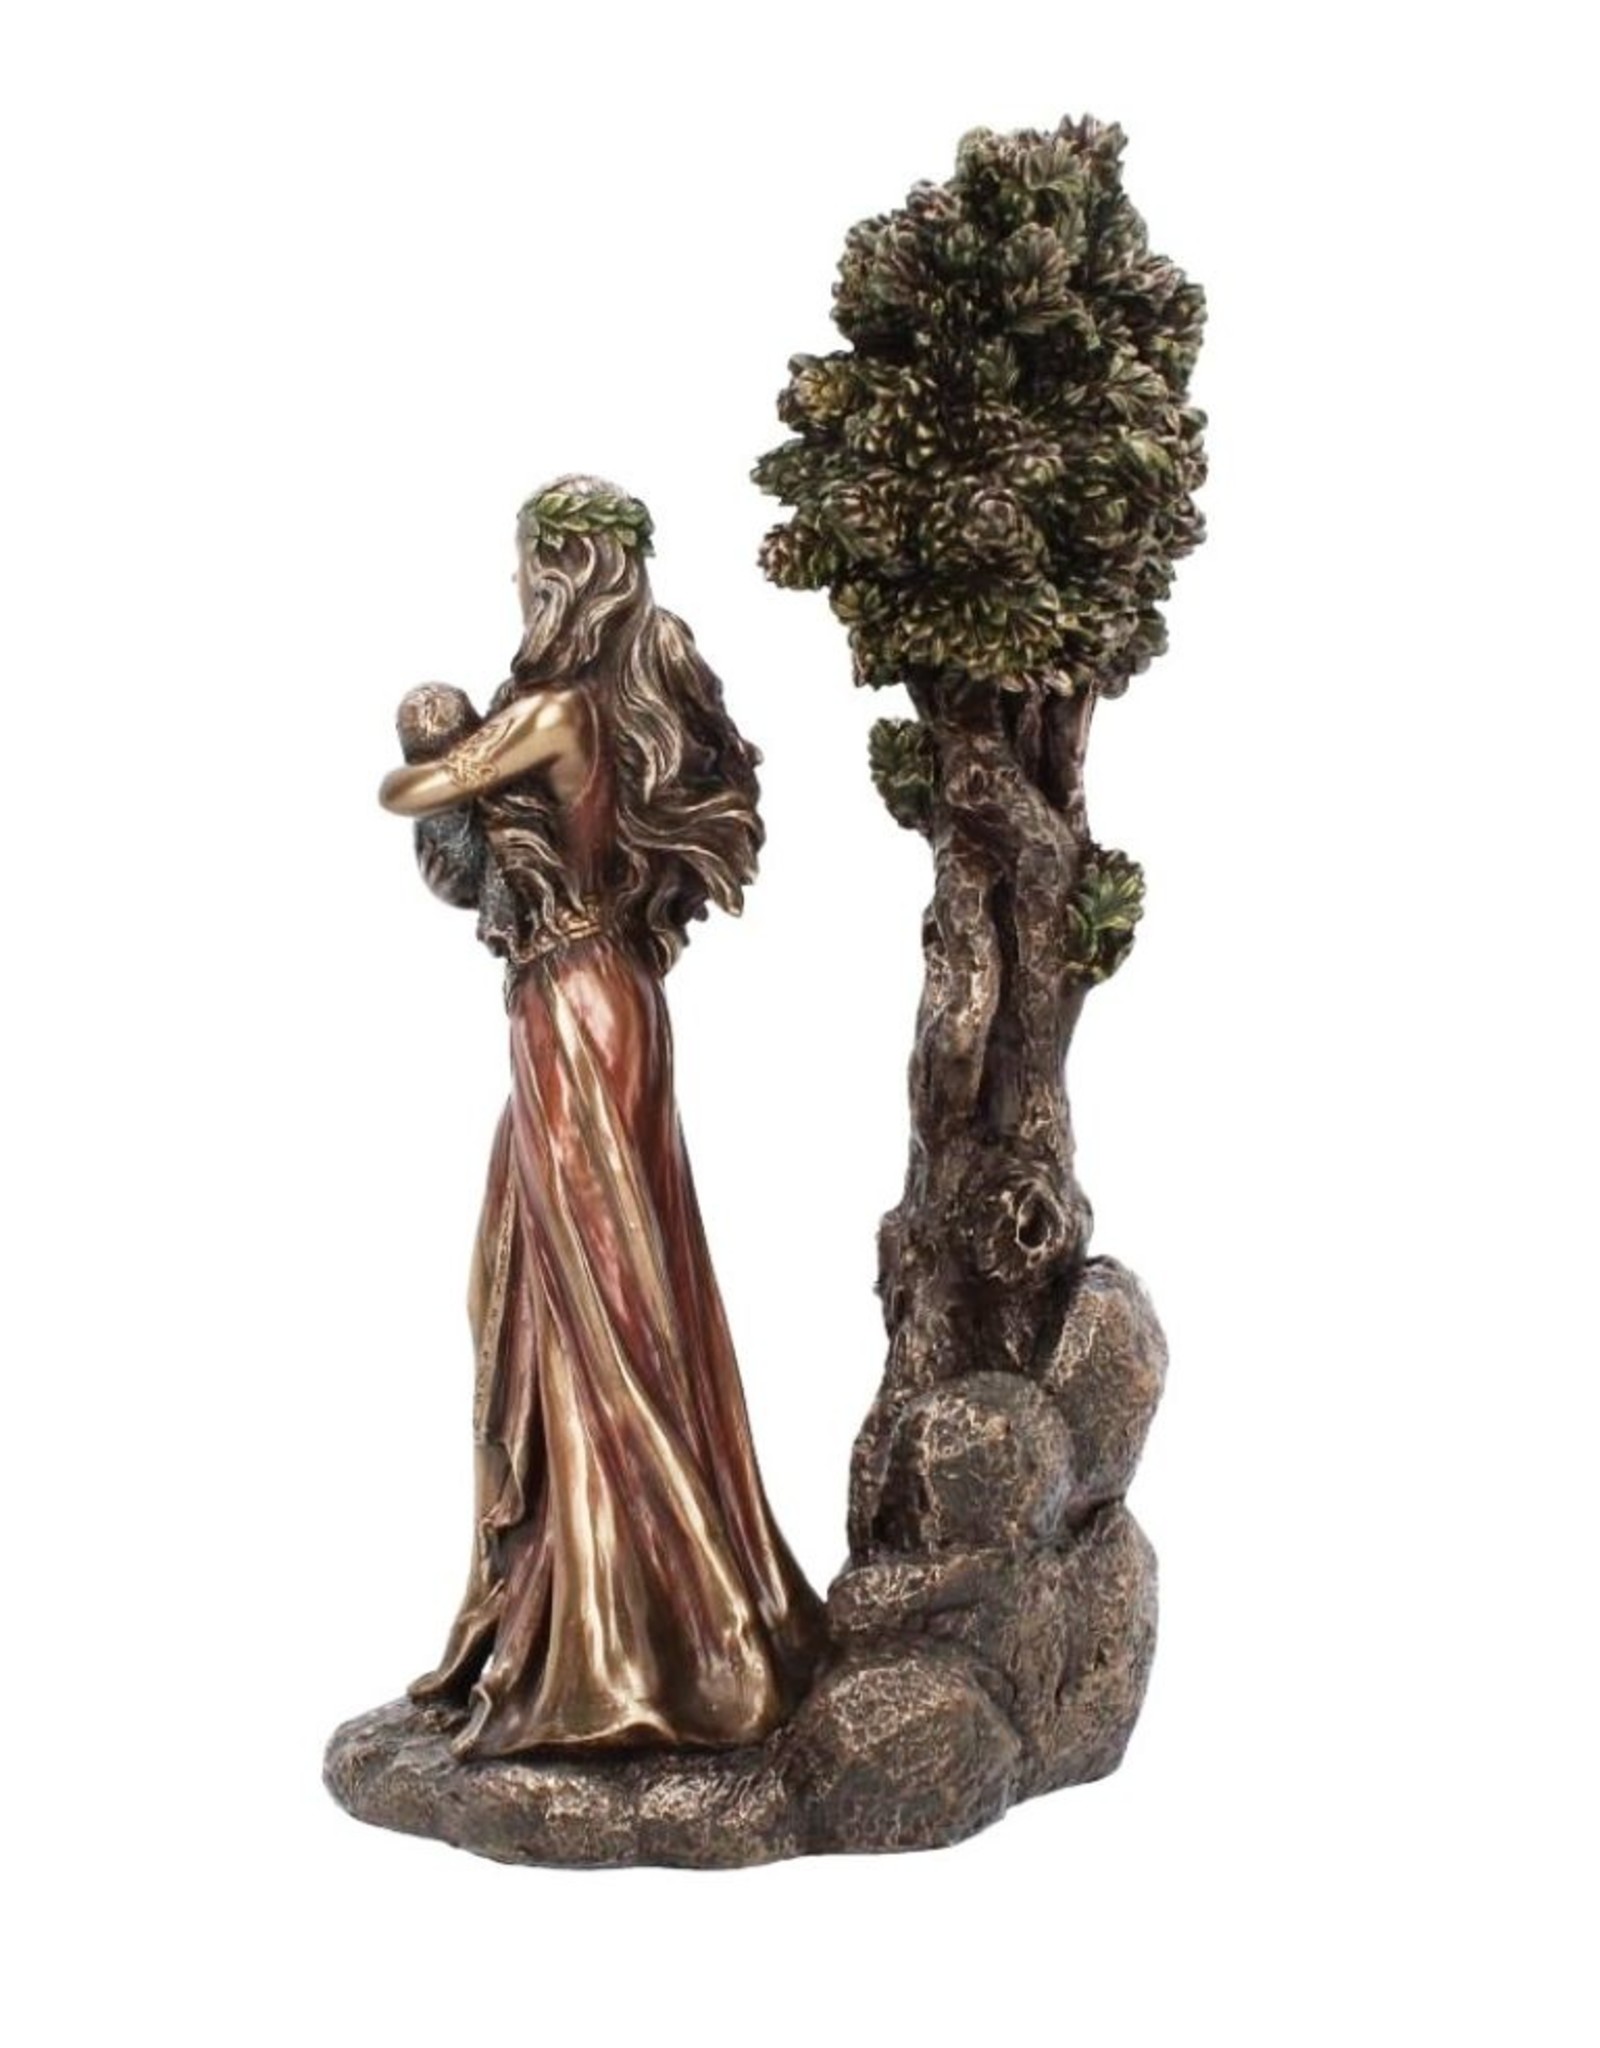 Willow Hall Giftware & Lifestyle - Danu - Mother of the Gods bronzed figurine 29.5cm